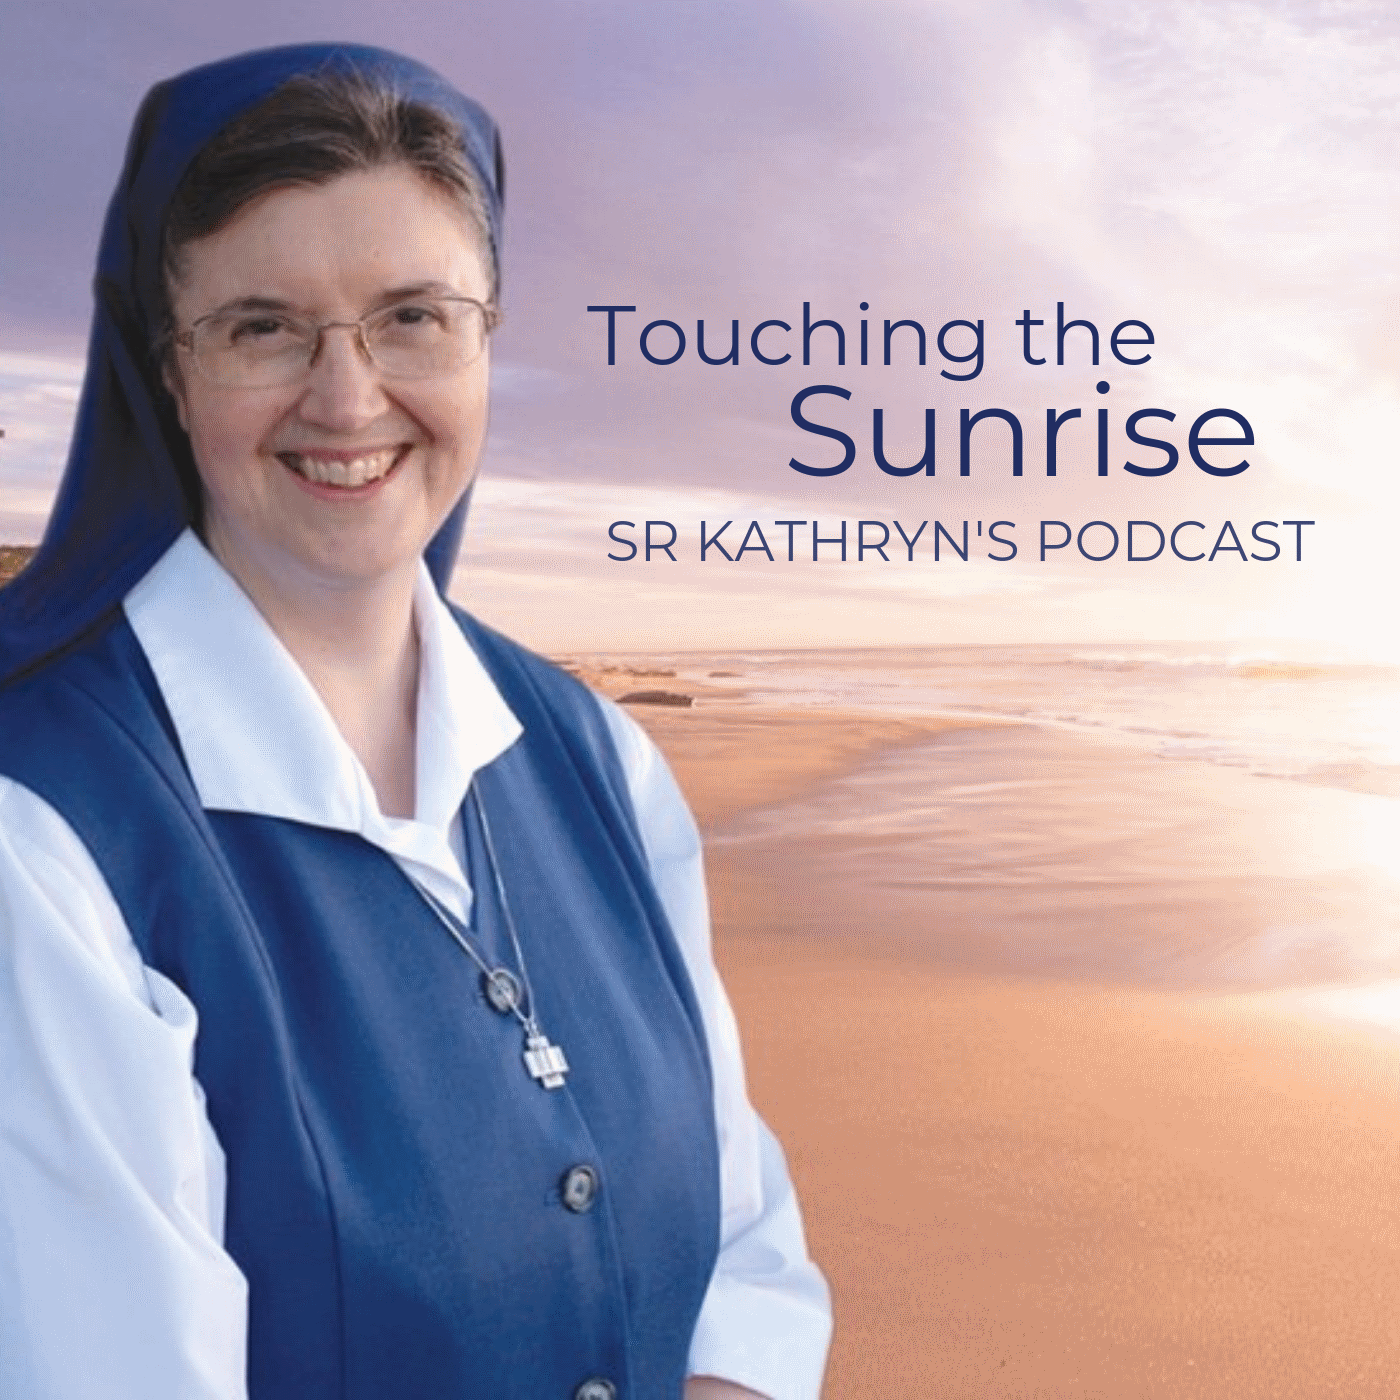 Sr Kathryn's Podcast - Touching the Sunrise